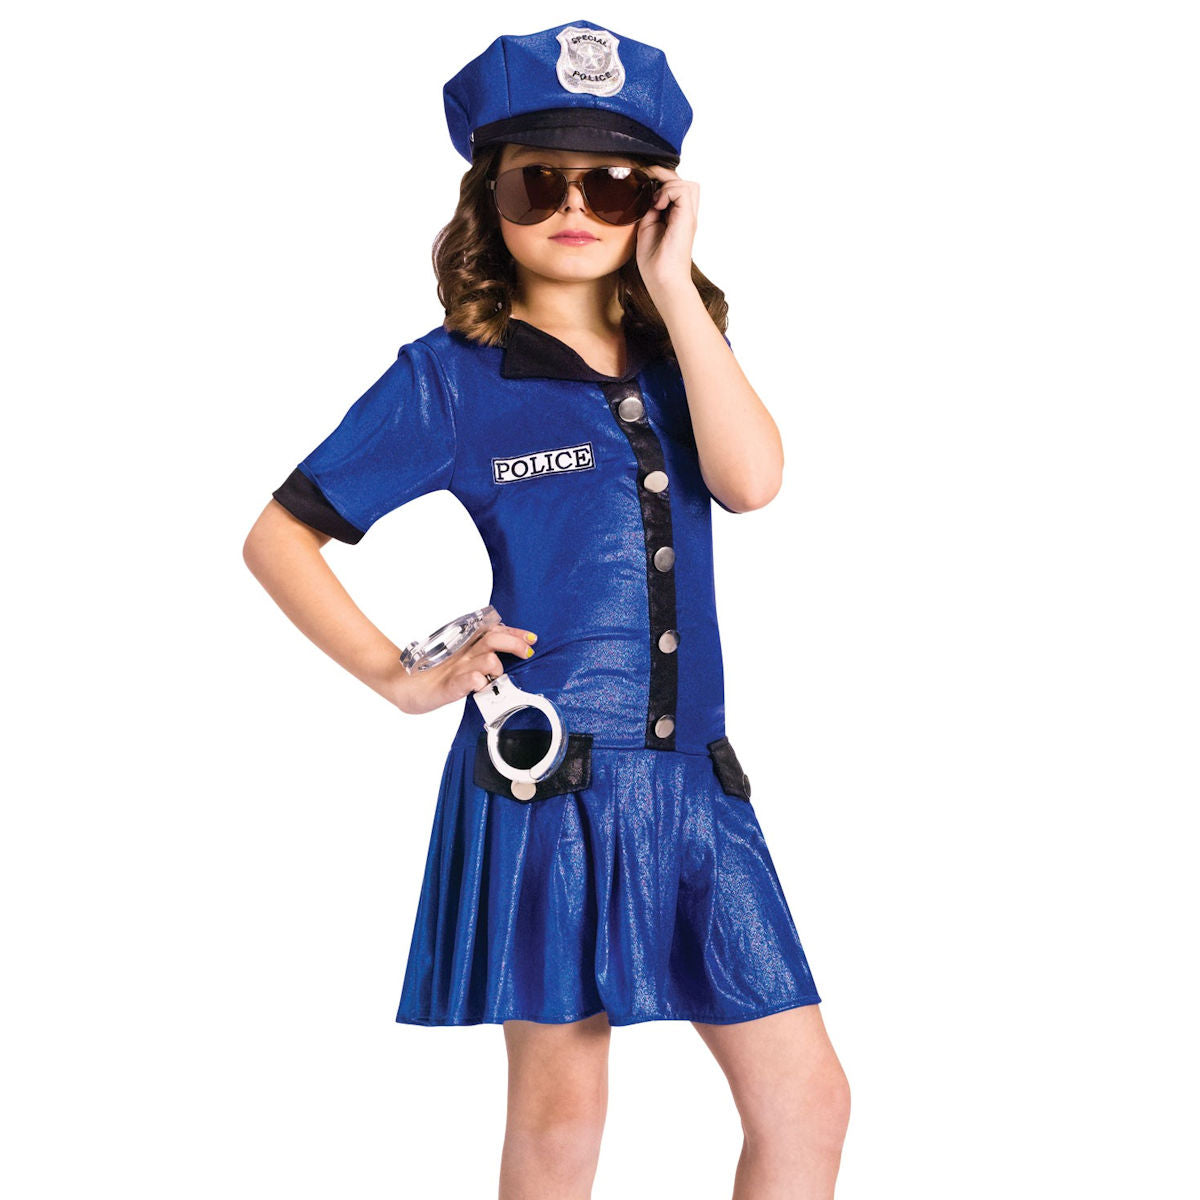 Girls Police Officer Child Fancy Dress Costume with Hat